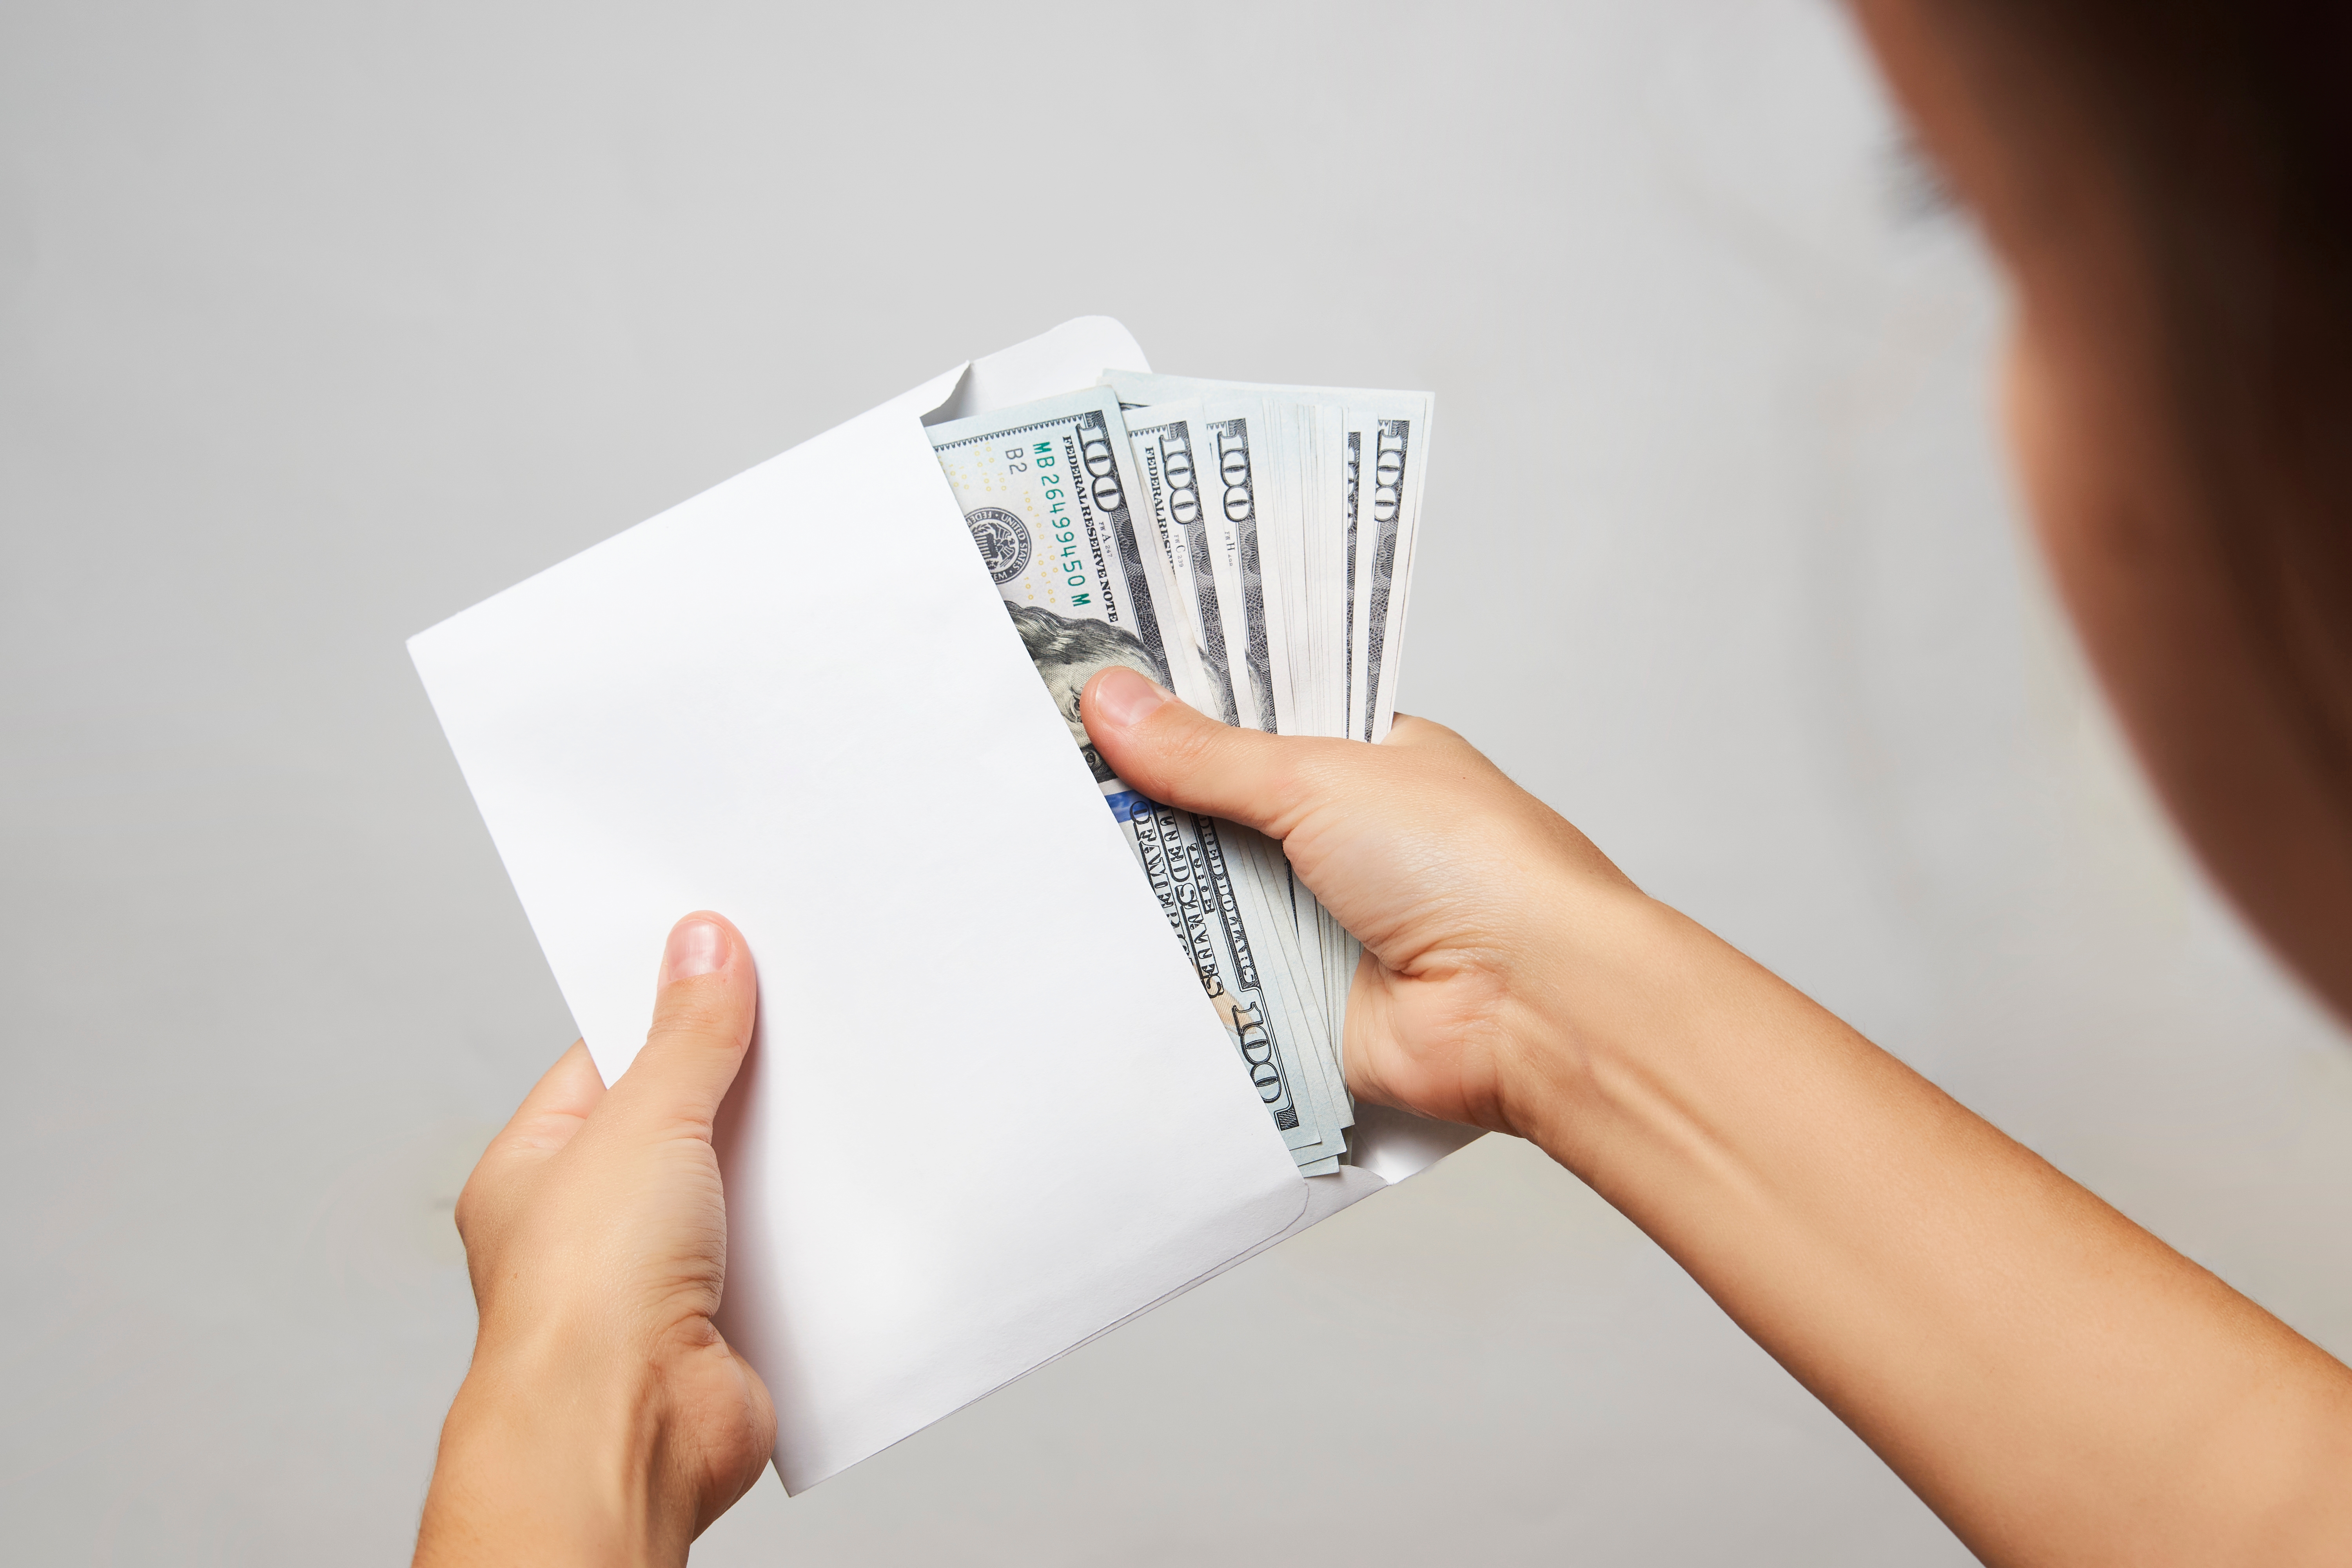 Woman takes the money out of the envelope | Source: Shutterstock.com